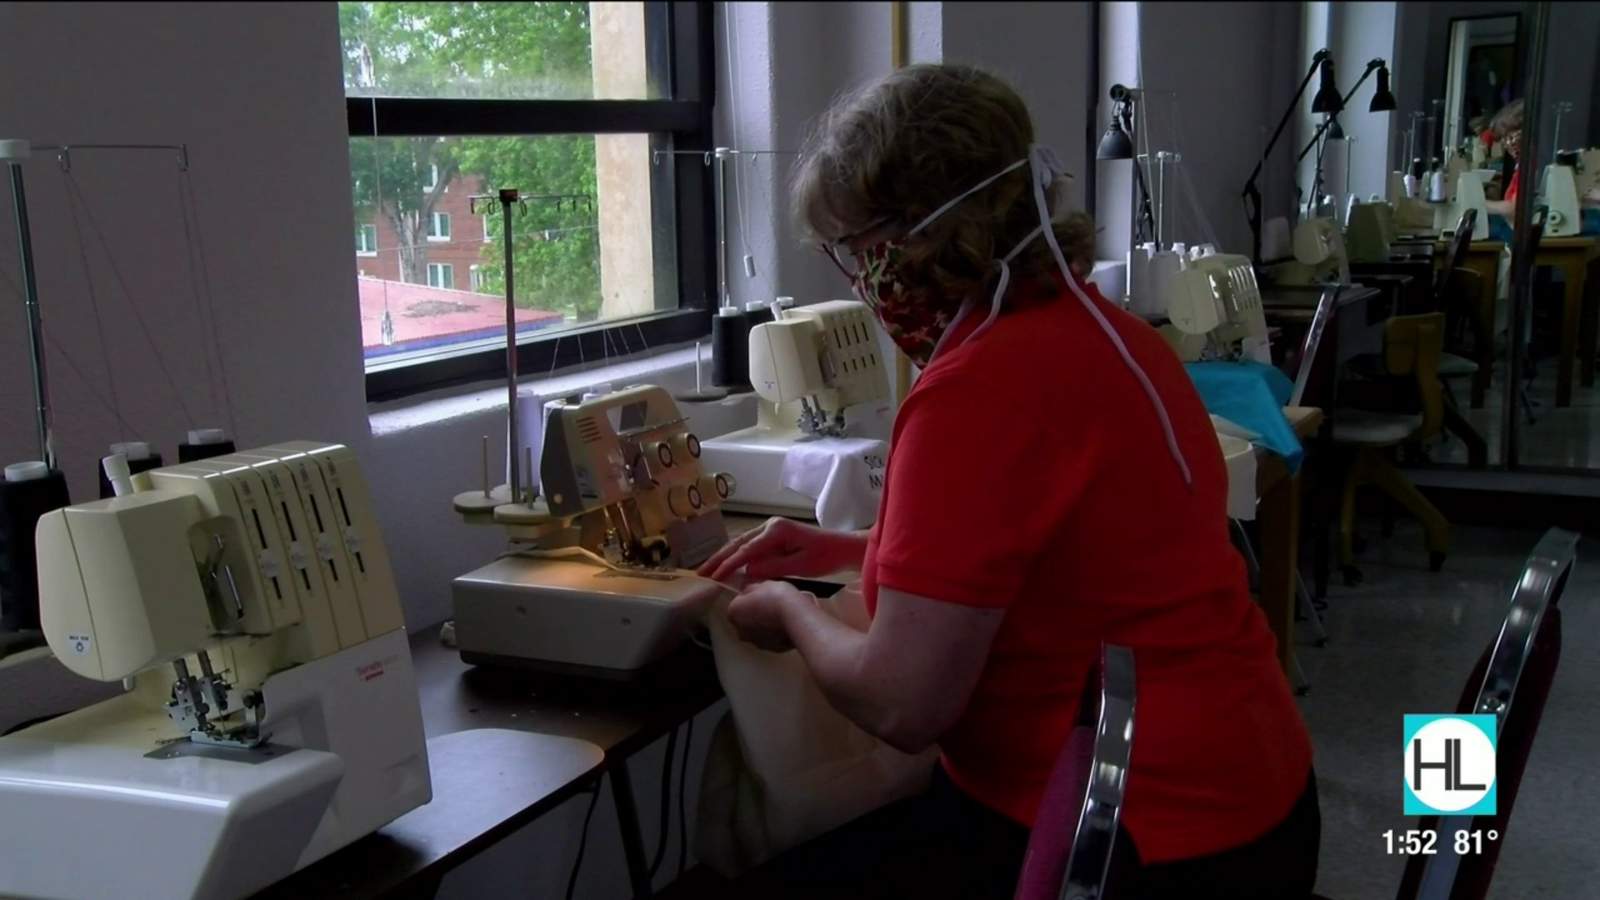 Everyday Heroes: service through sewing at Sam Houston State University